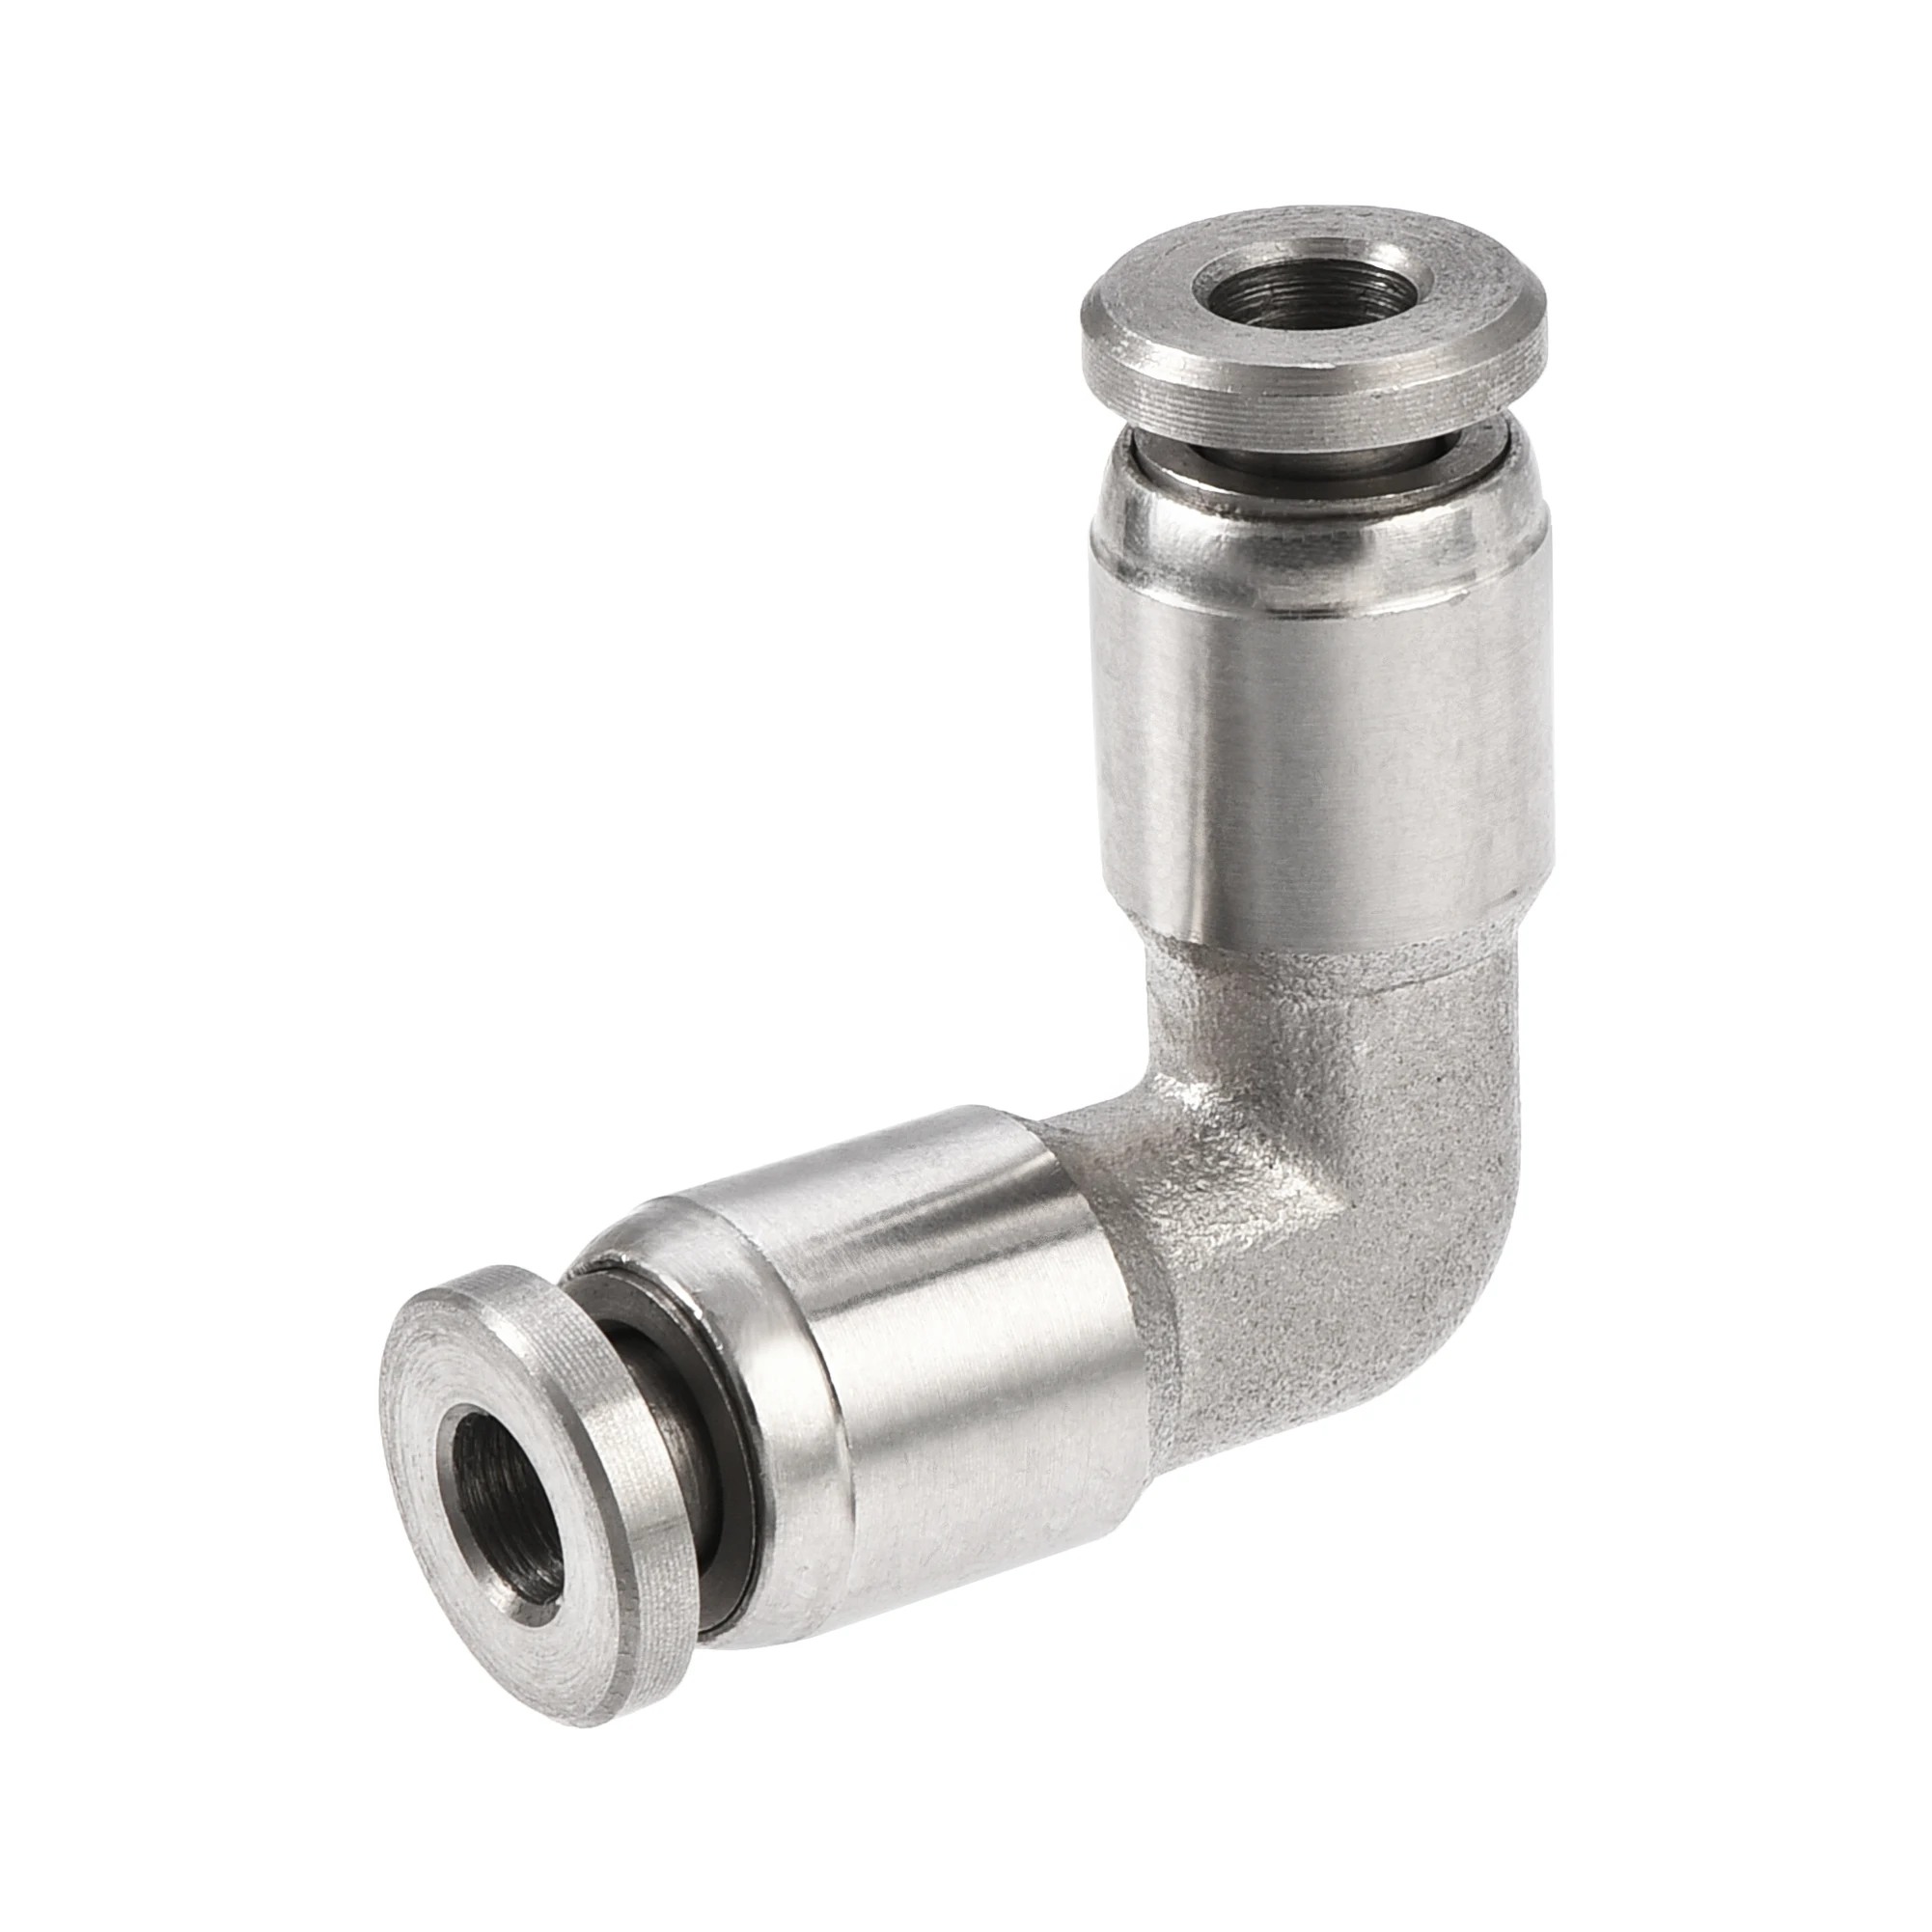 

uxcell 1Pcs Push to Connect Tube Fitting L Shape Pneumatic Connector for 4mm OD Tube Polyurethane or Nylon Tubing etc